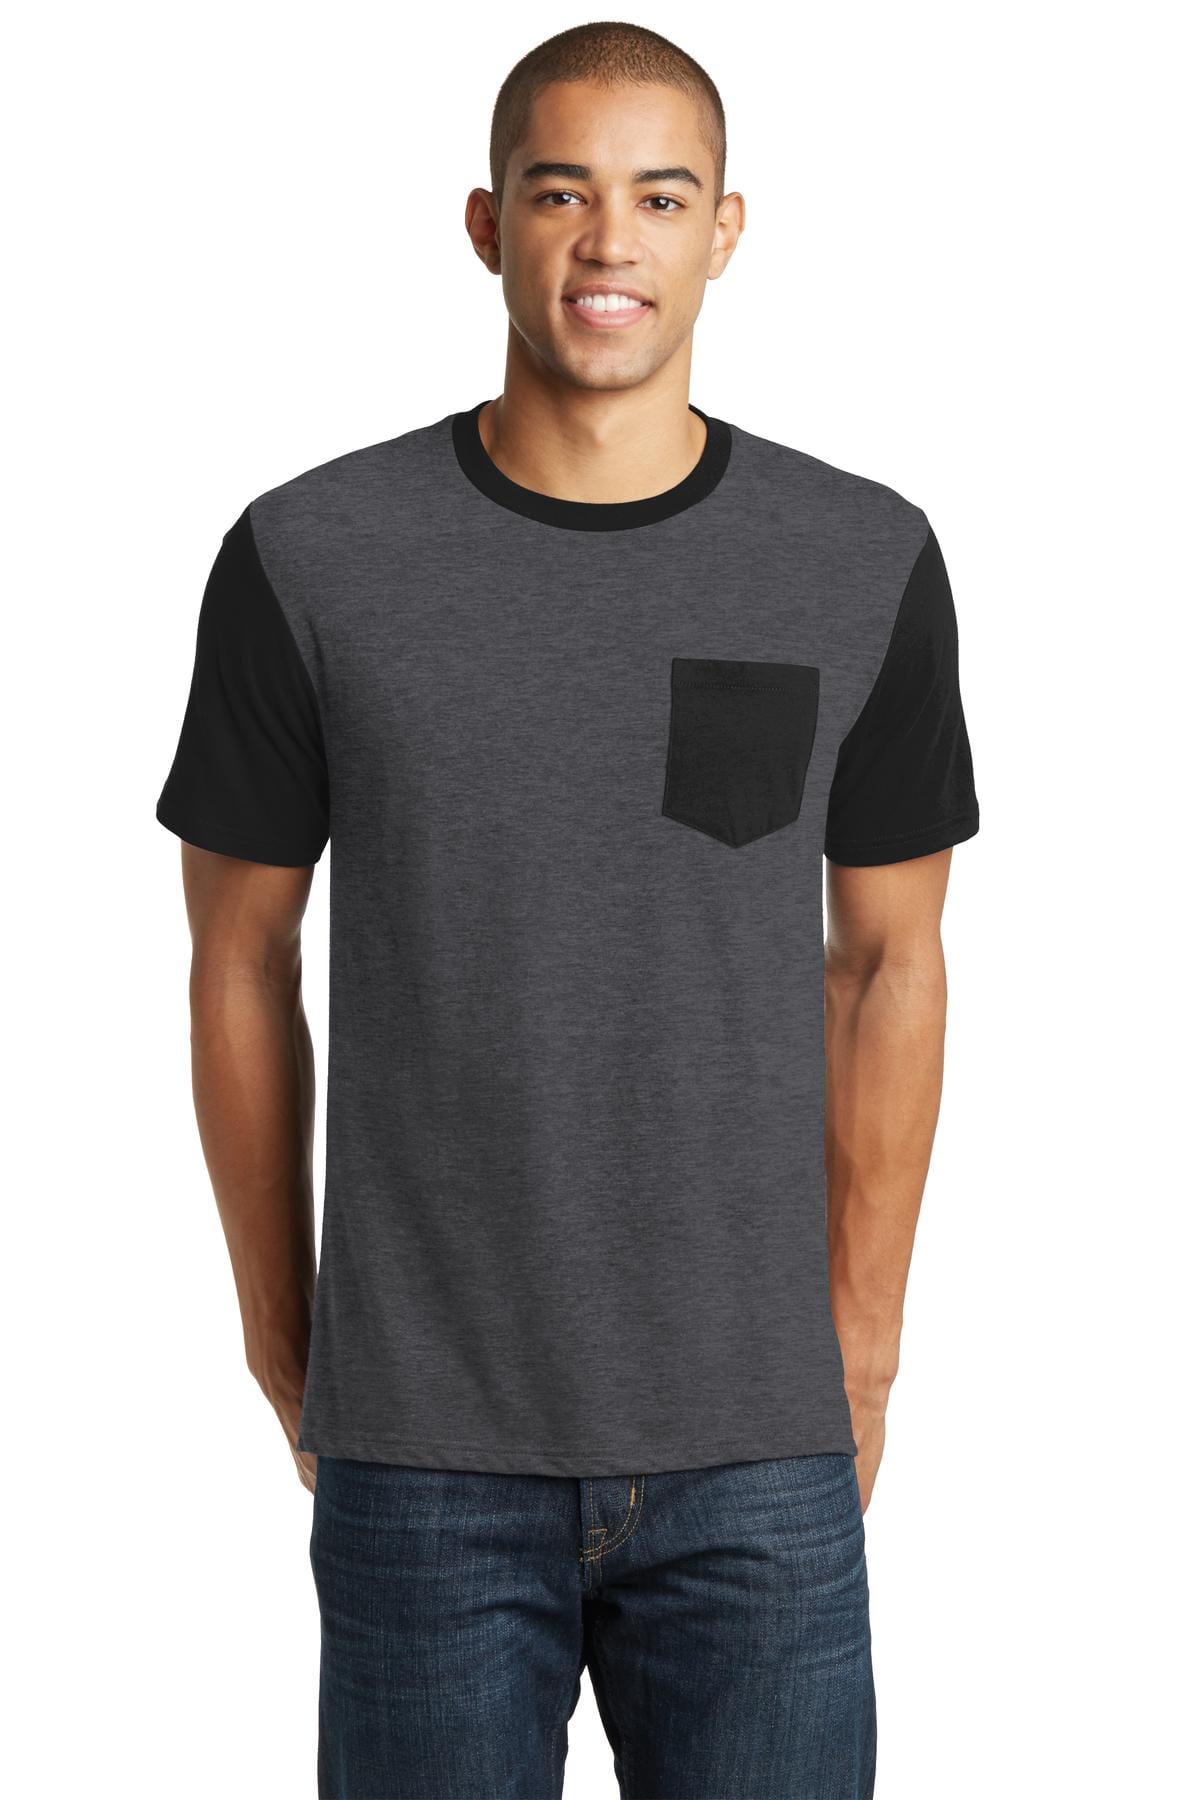 DISCONTINUED  District ®  Young Mens Very Important Tee ®  with Contrast Sleeves and Pocket. DT6000SP